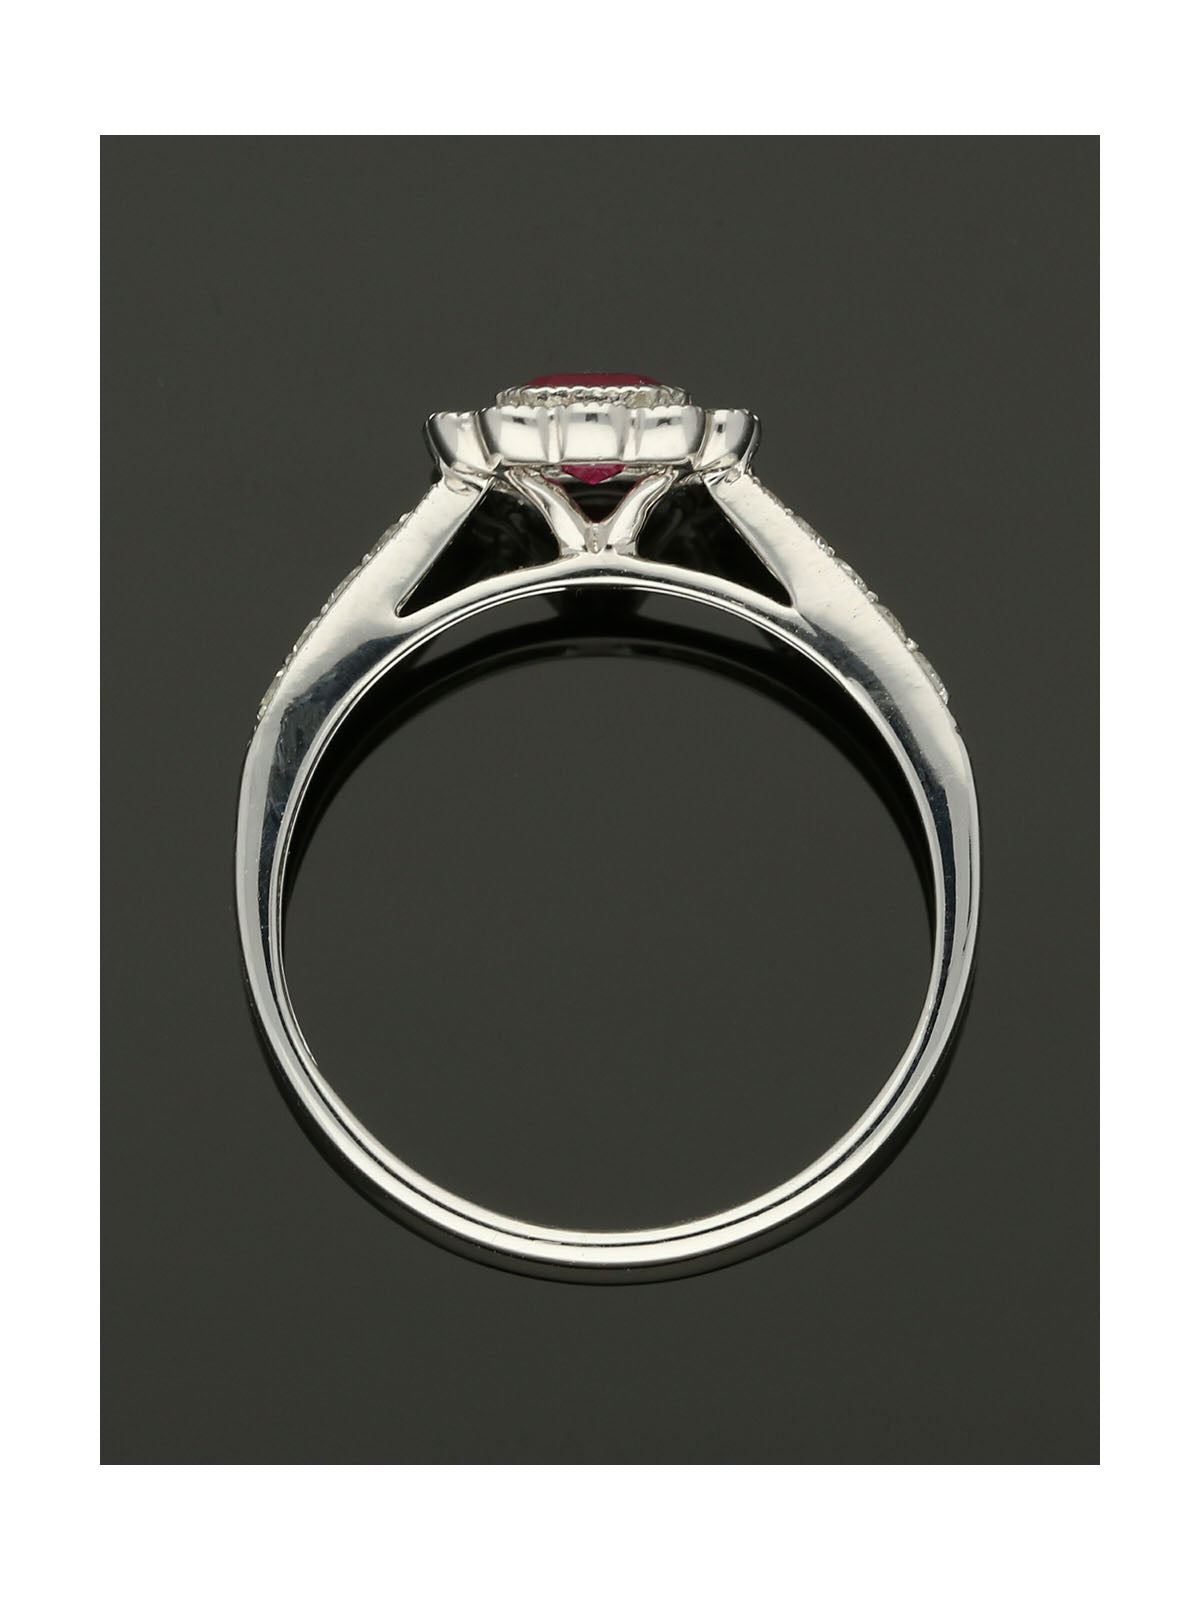 Ruby & Diamond Cluster Ring in 9ct White Gold